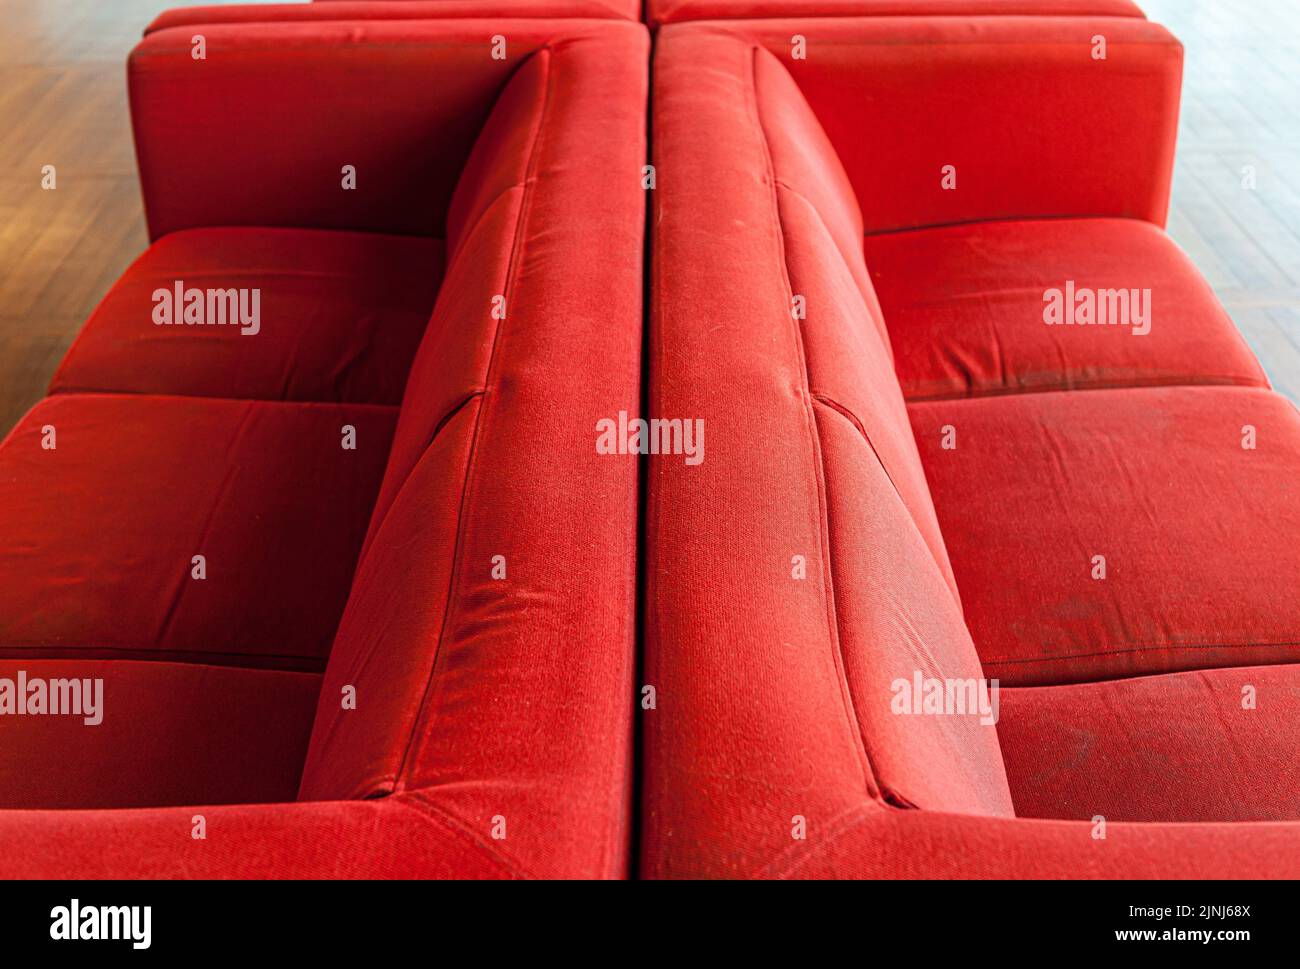 The two red sofas against each other in a room Stock Photo